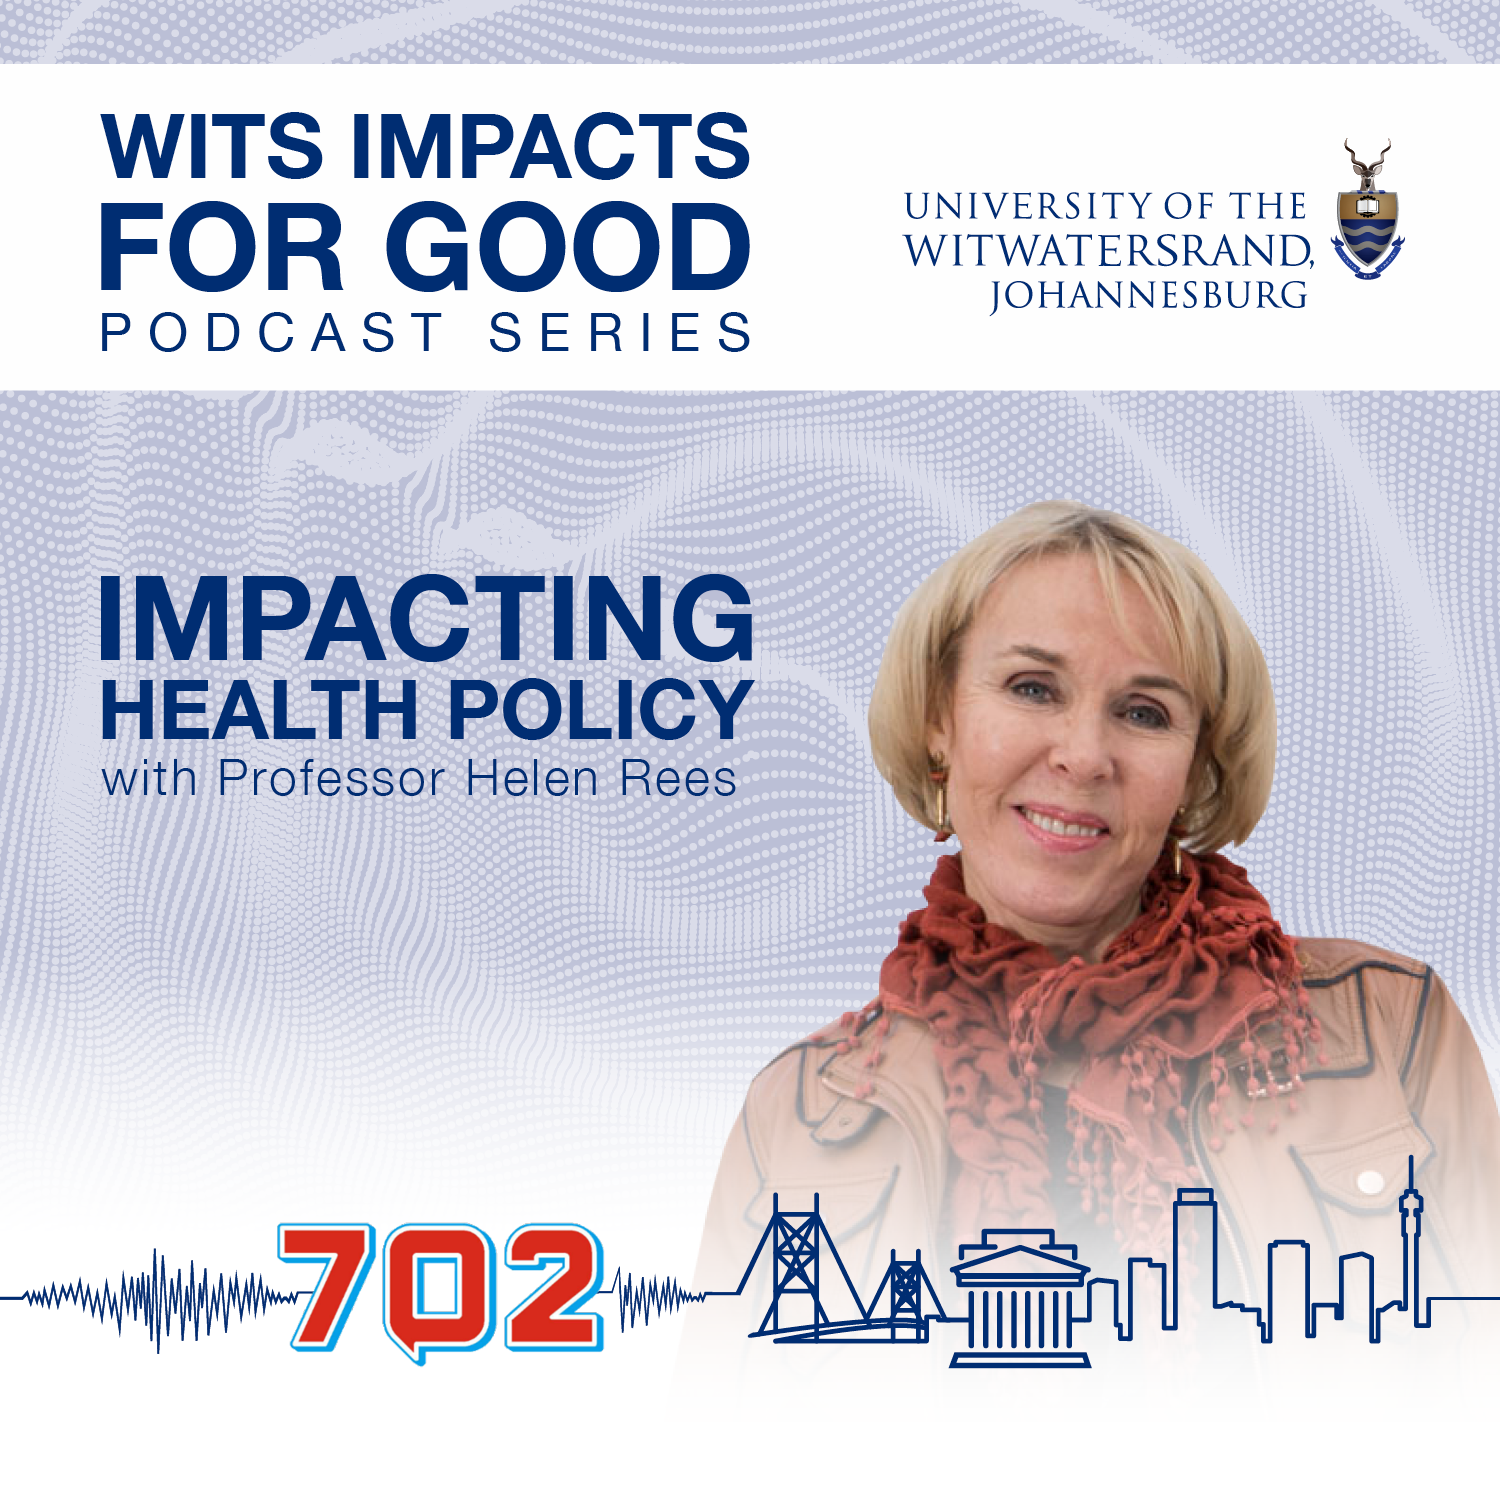 Helen Rees: The Wits researcher championing SA’s fight against Covid-19